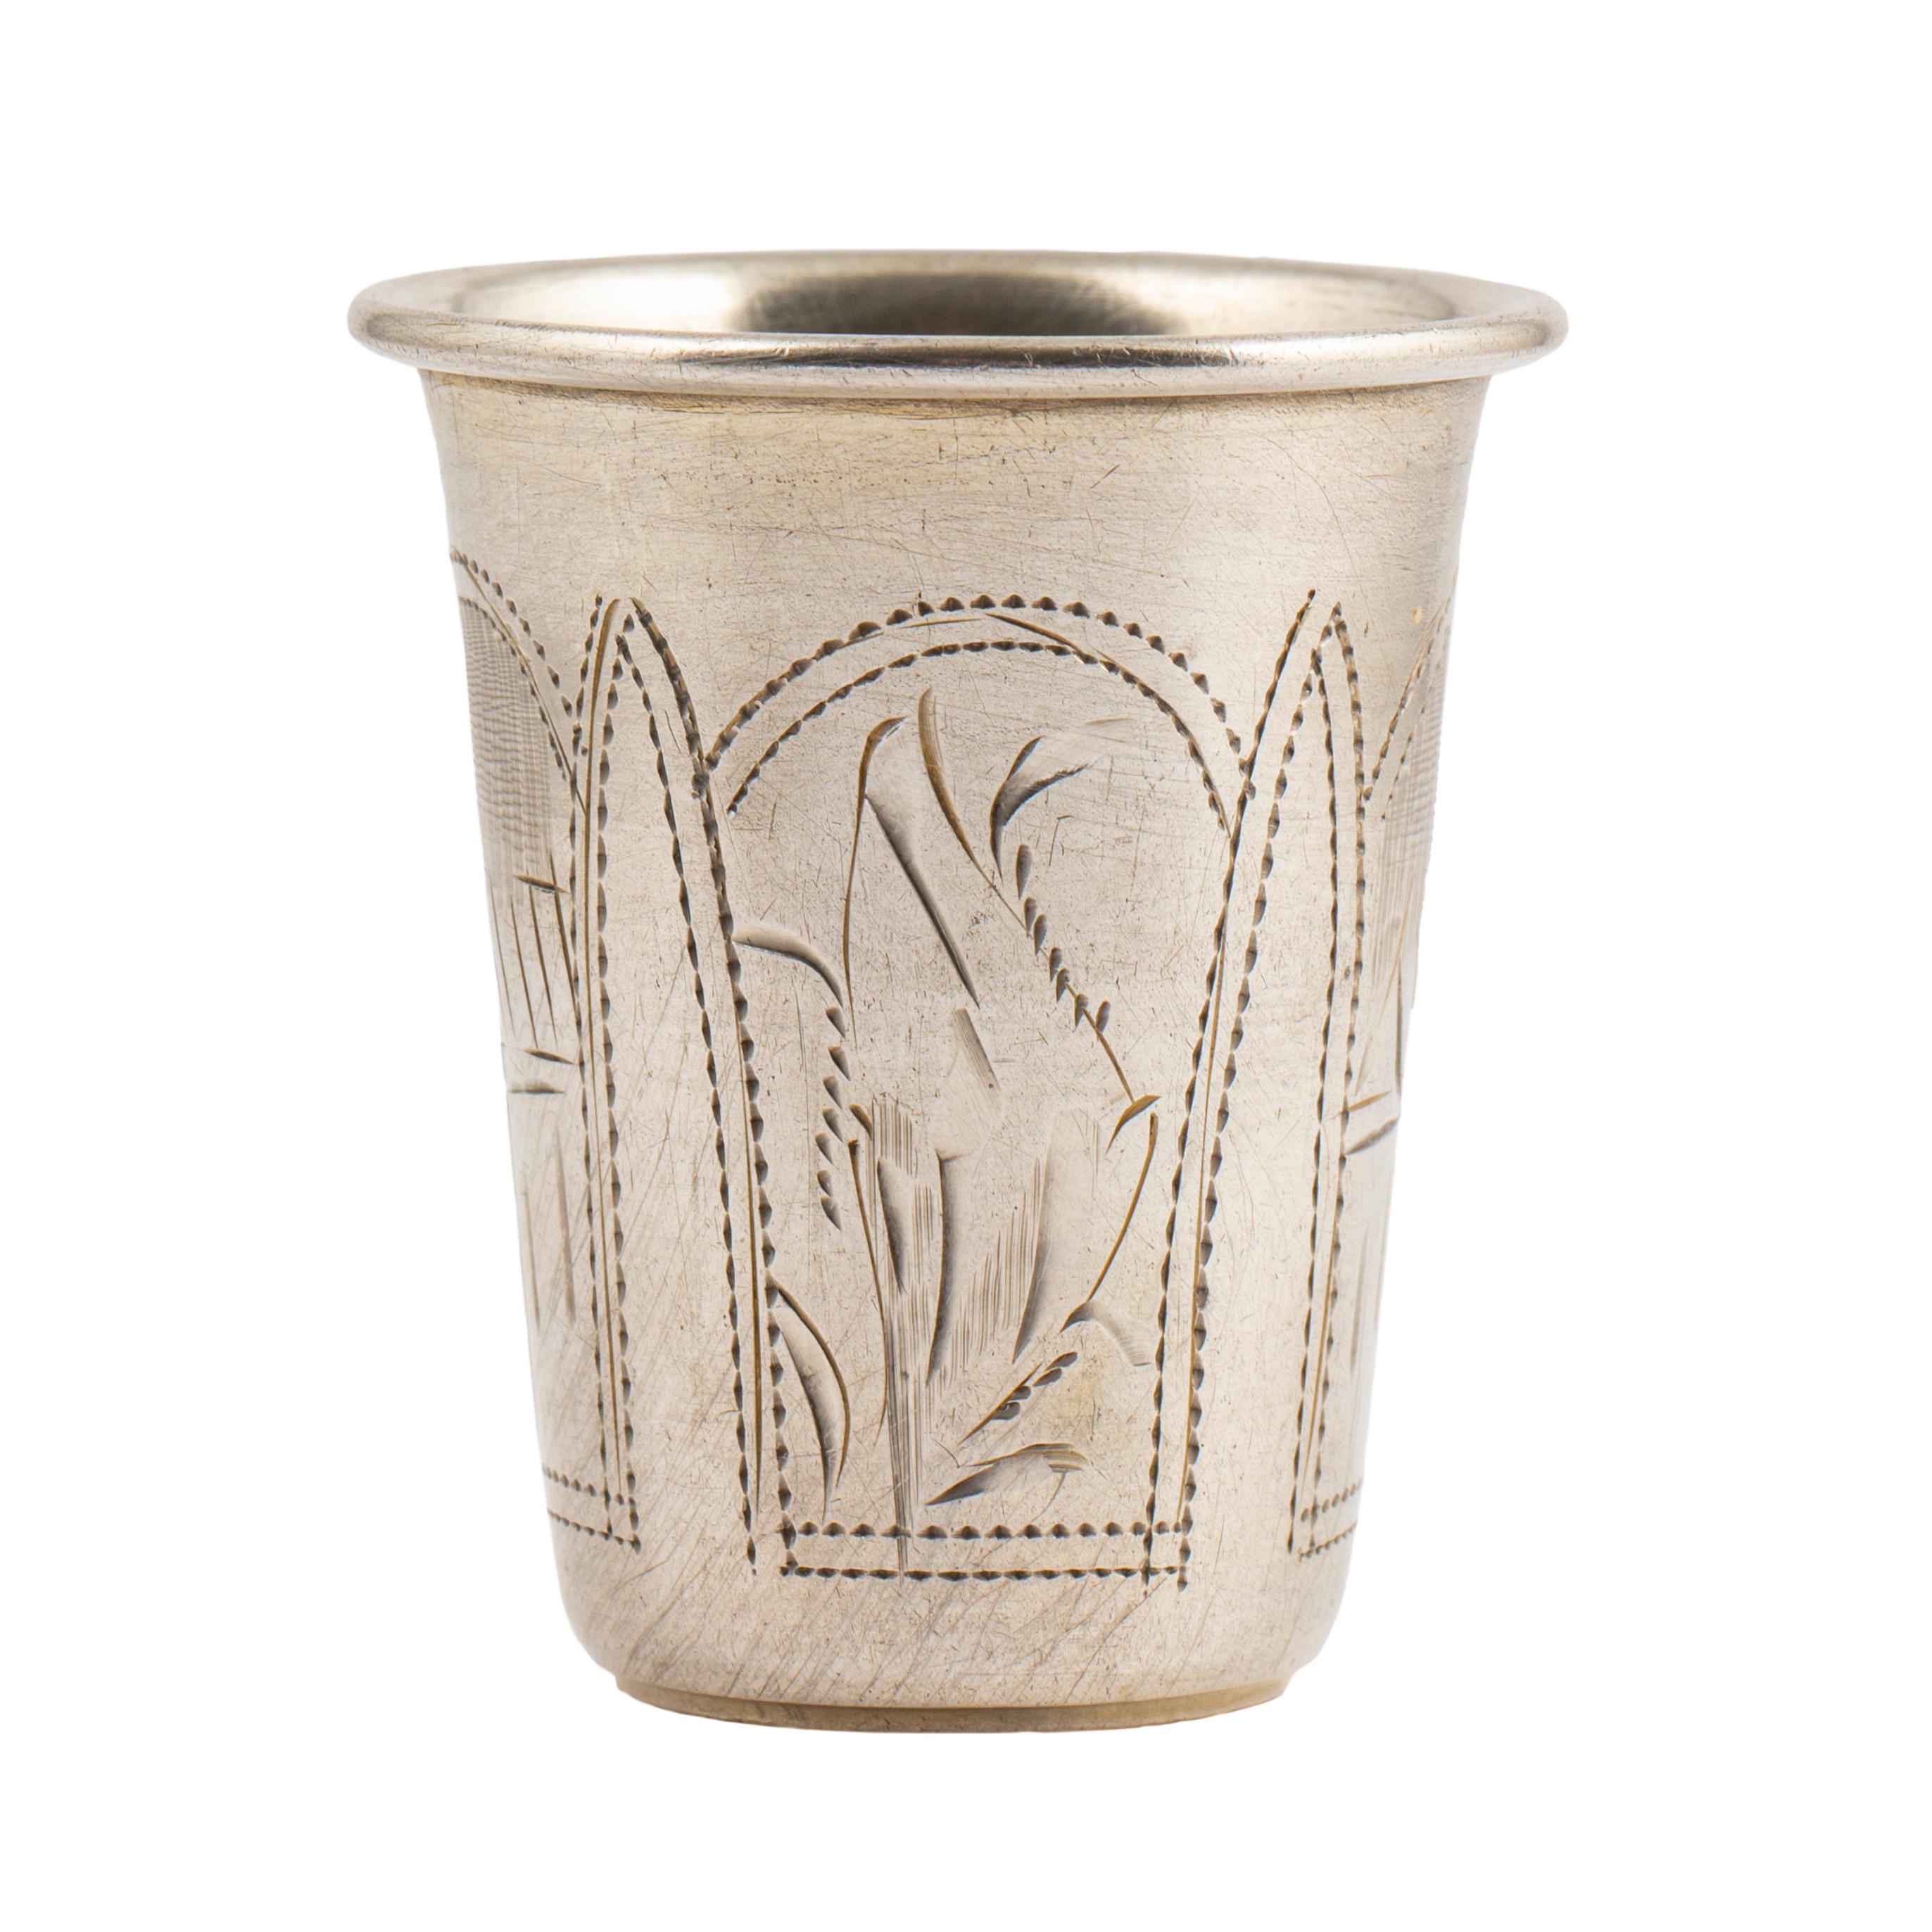 Russian Empire Five Ukrainian Imperial-era Silver Vodka Cups, late 19th to early 20th century